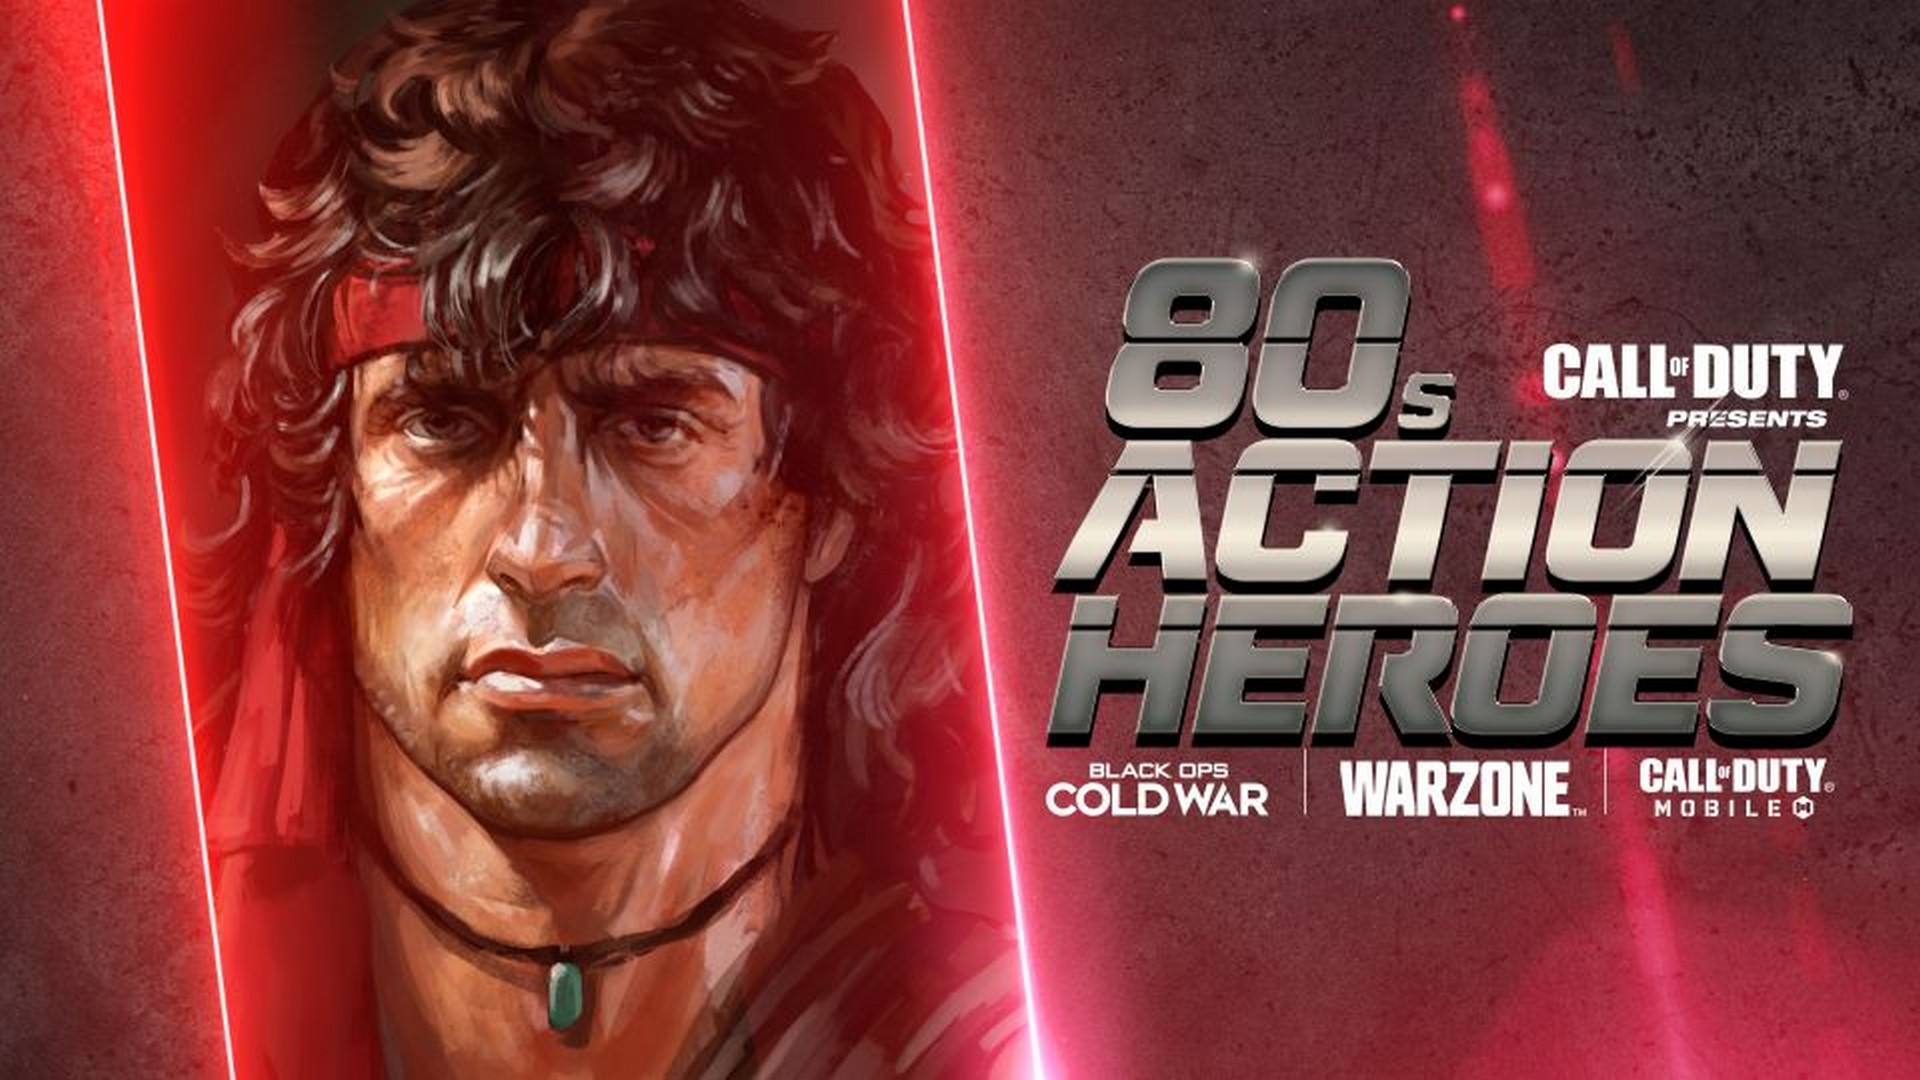 80’s Action Heroes Rambo and John McClane Make Their Explosive Debut Across Call of Duty